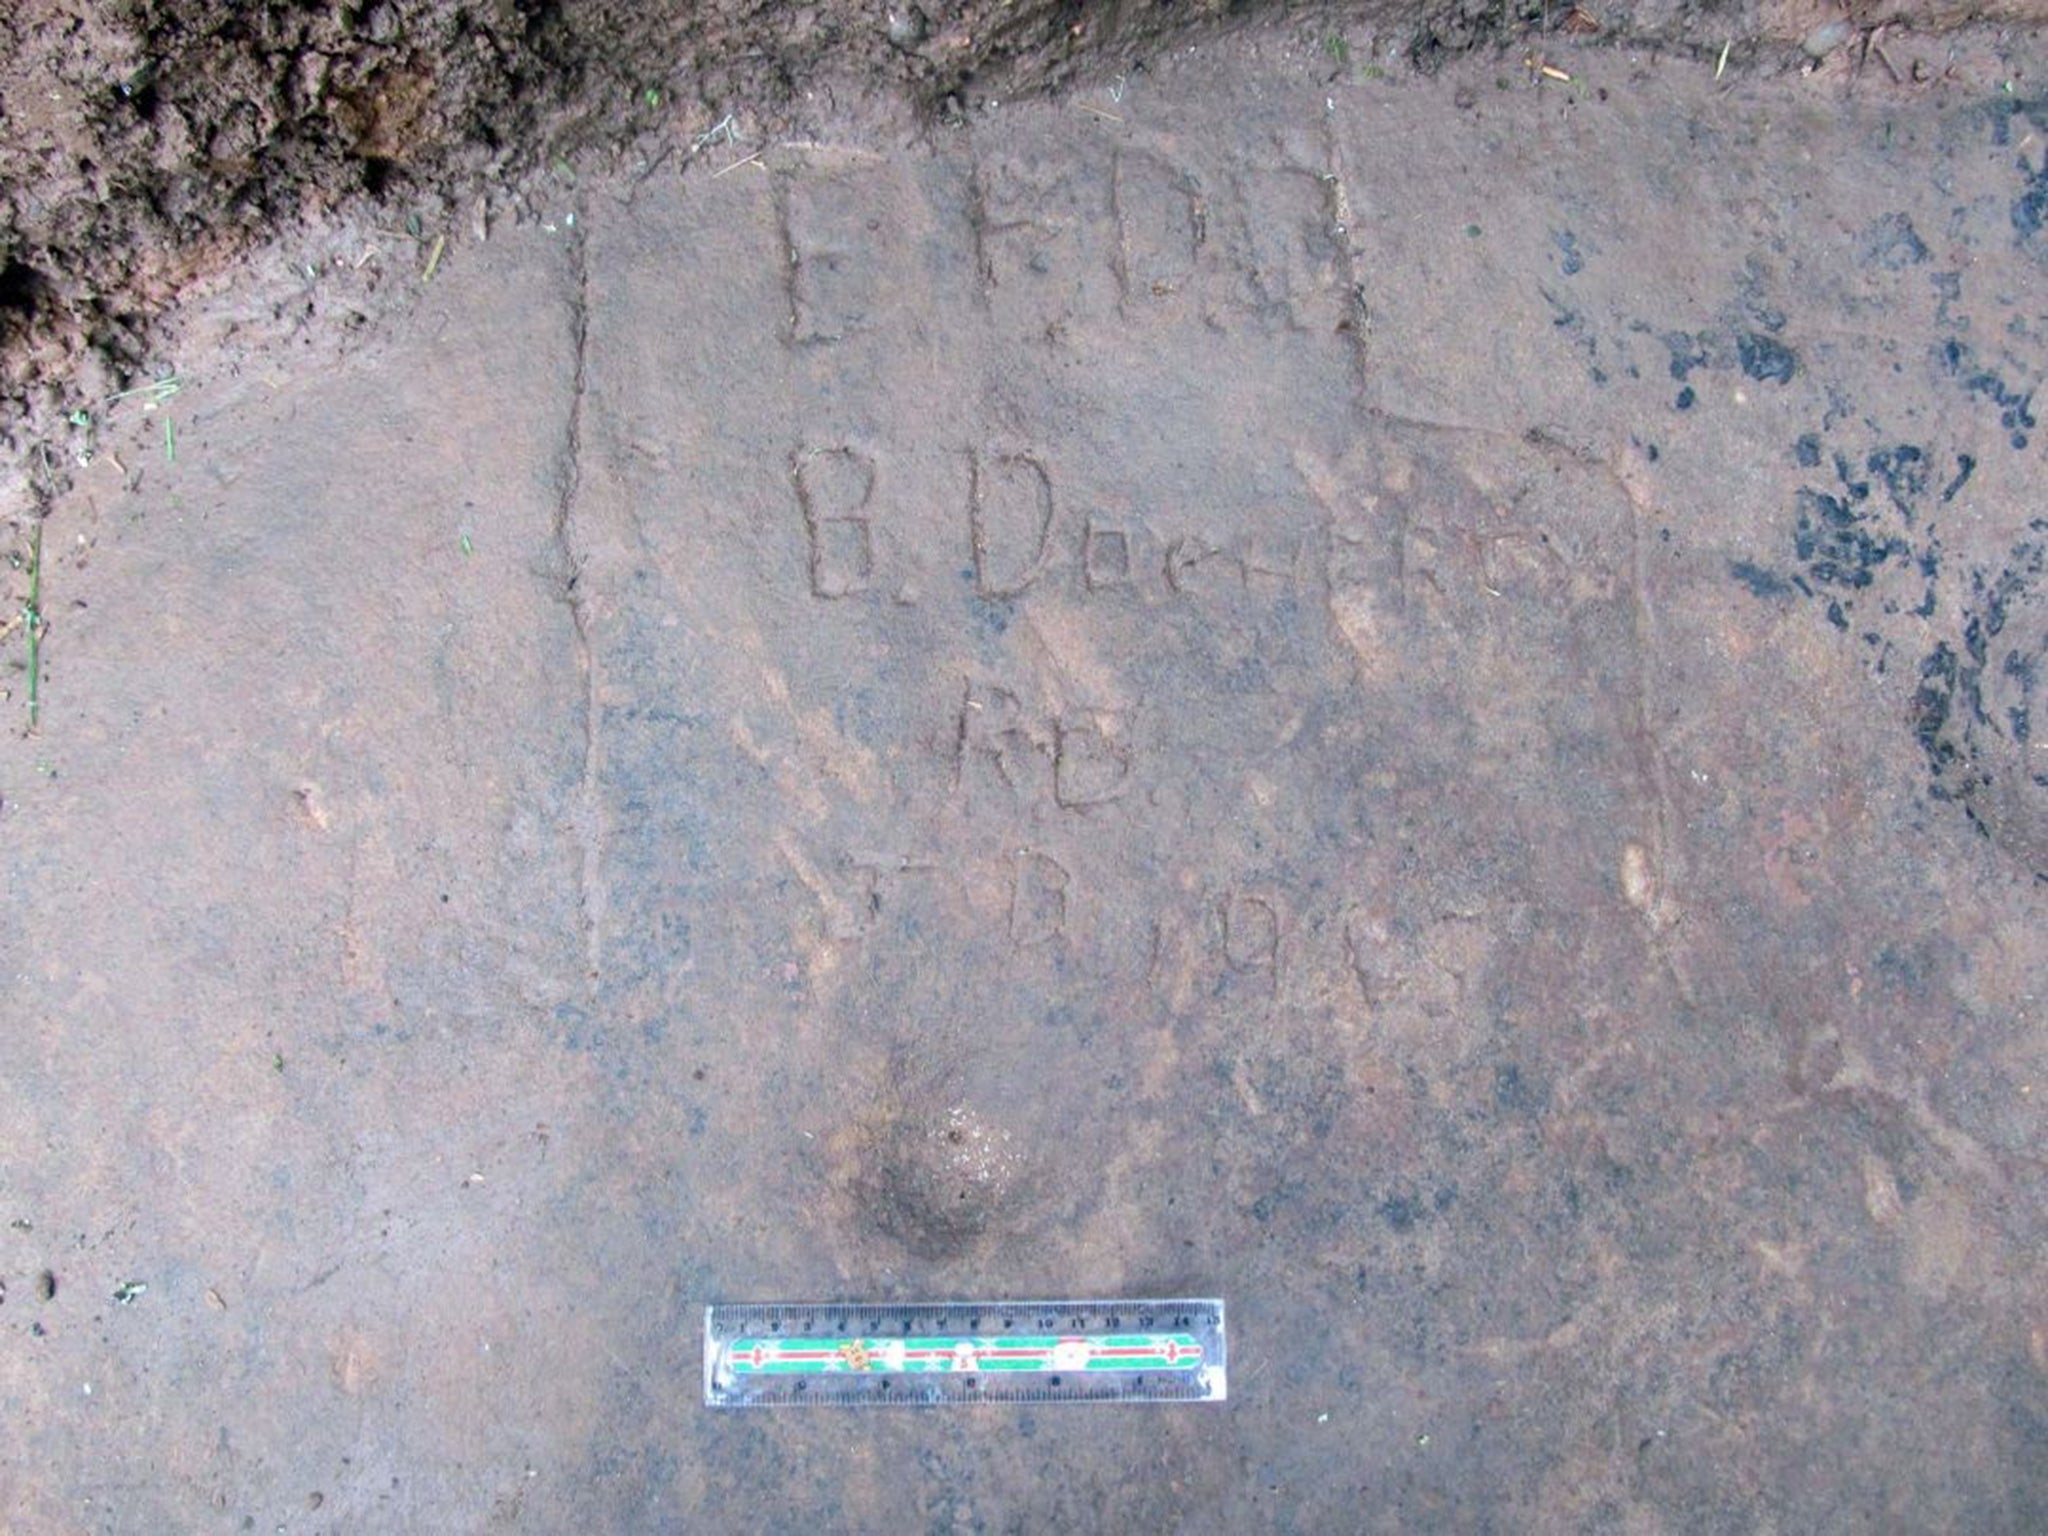 The stone panel dates back to 3000BC and is one of the best examples of Neolithic cup and ring markings in Europe